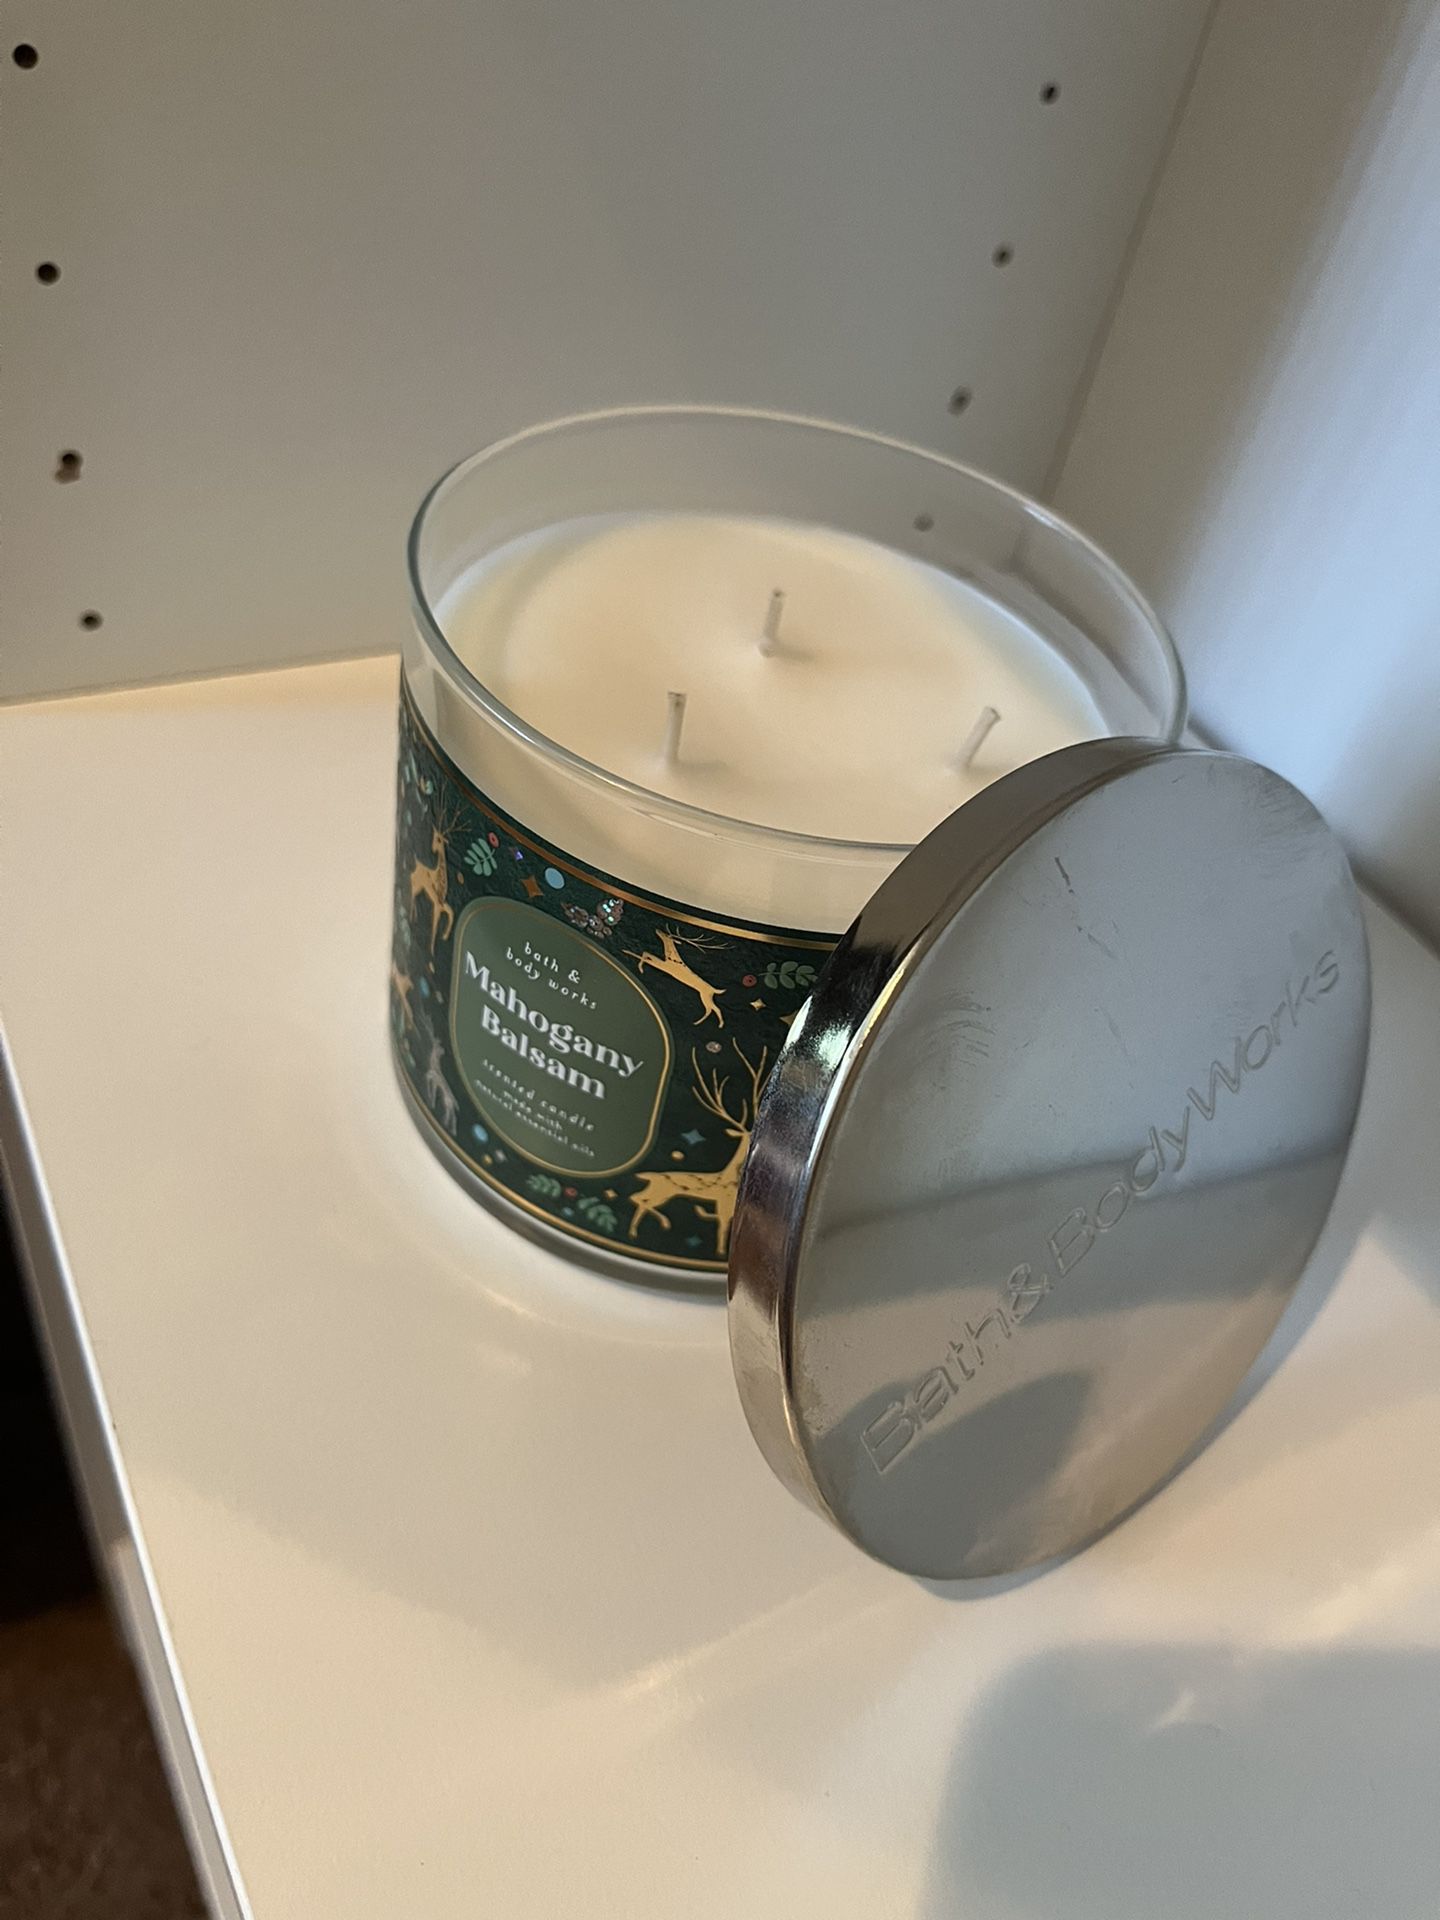 Bath and Body Works Candle (various available!)